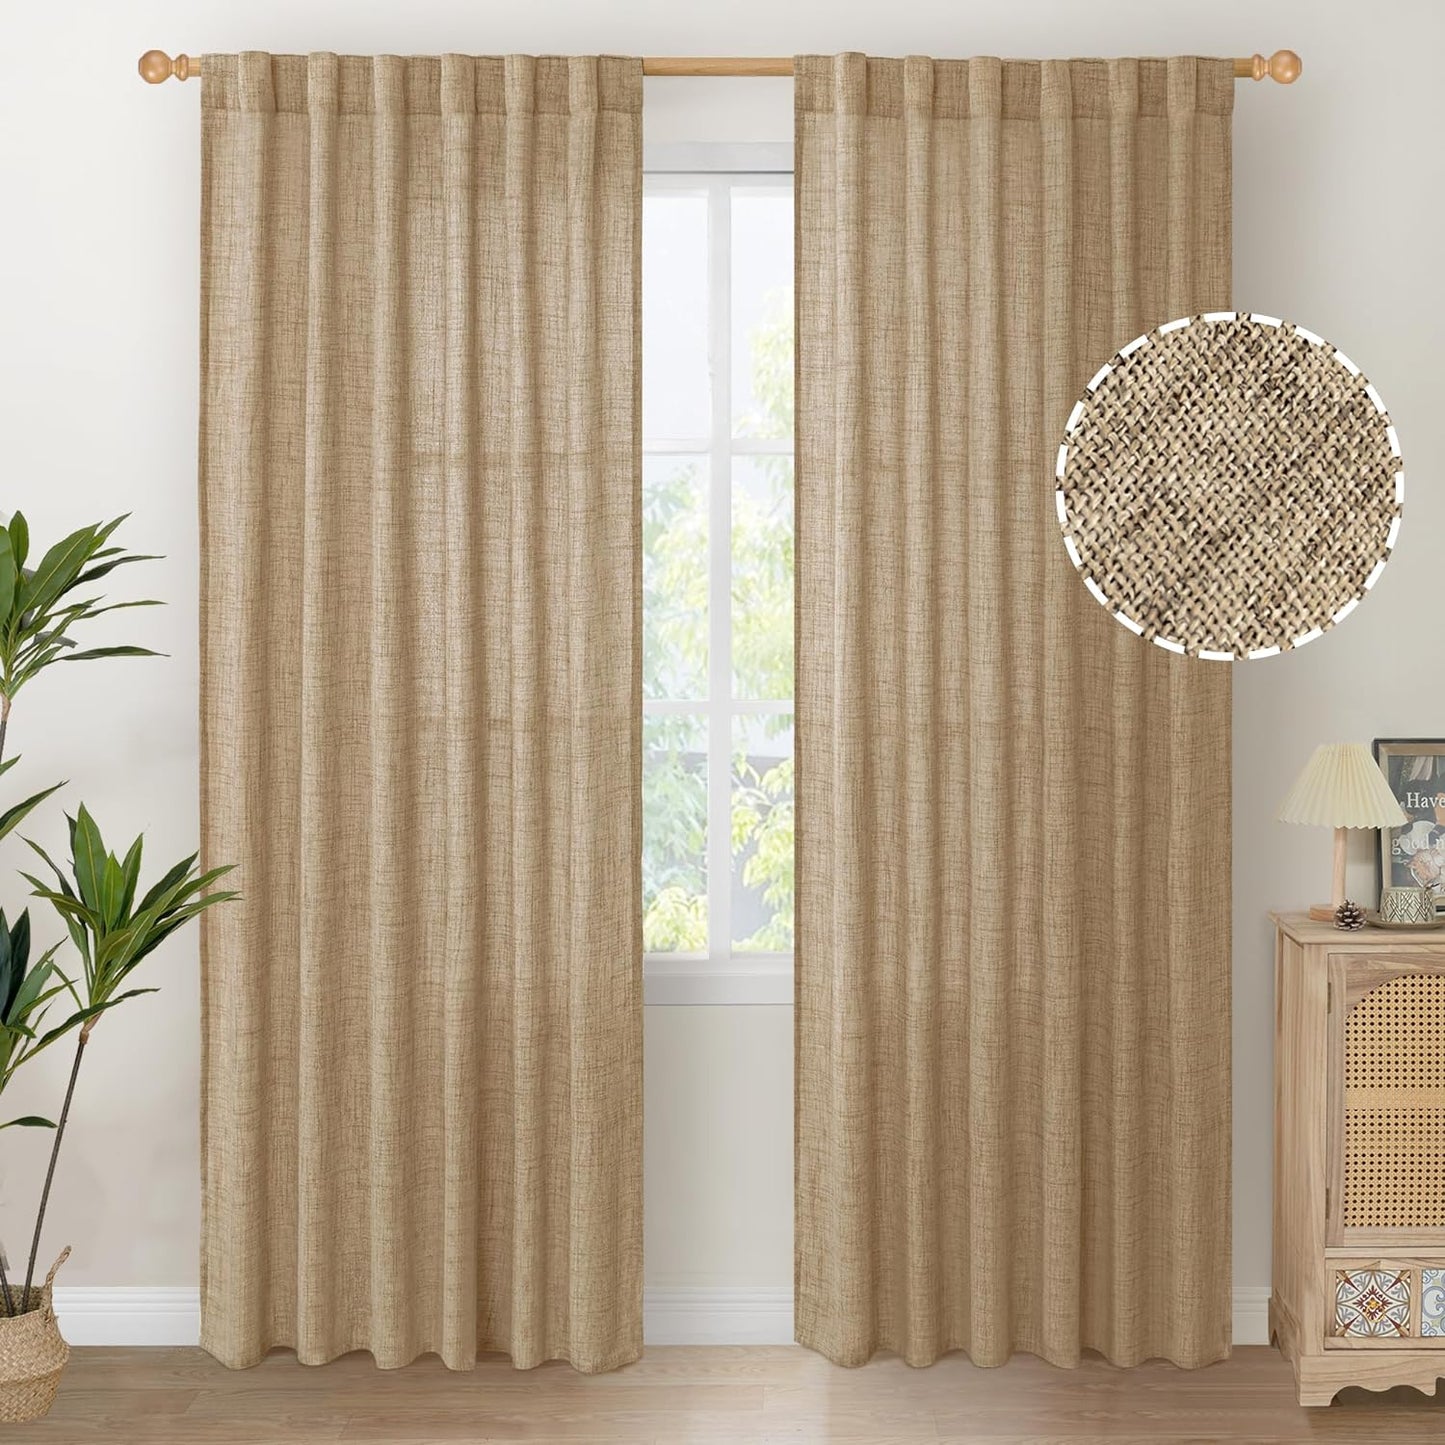 Youngstex Natural Linen Curtains 72 Inch Length 2 Panels for Living Room Light Filtering Textured Window Drapes for Bedroom Dining Office Back Tab Rod Pocket, 52 X 72 Inch  YoungsTex Toffee 52W X 84L 